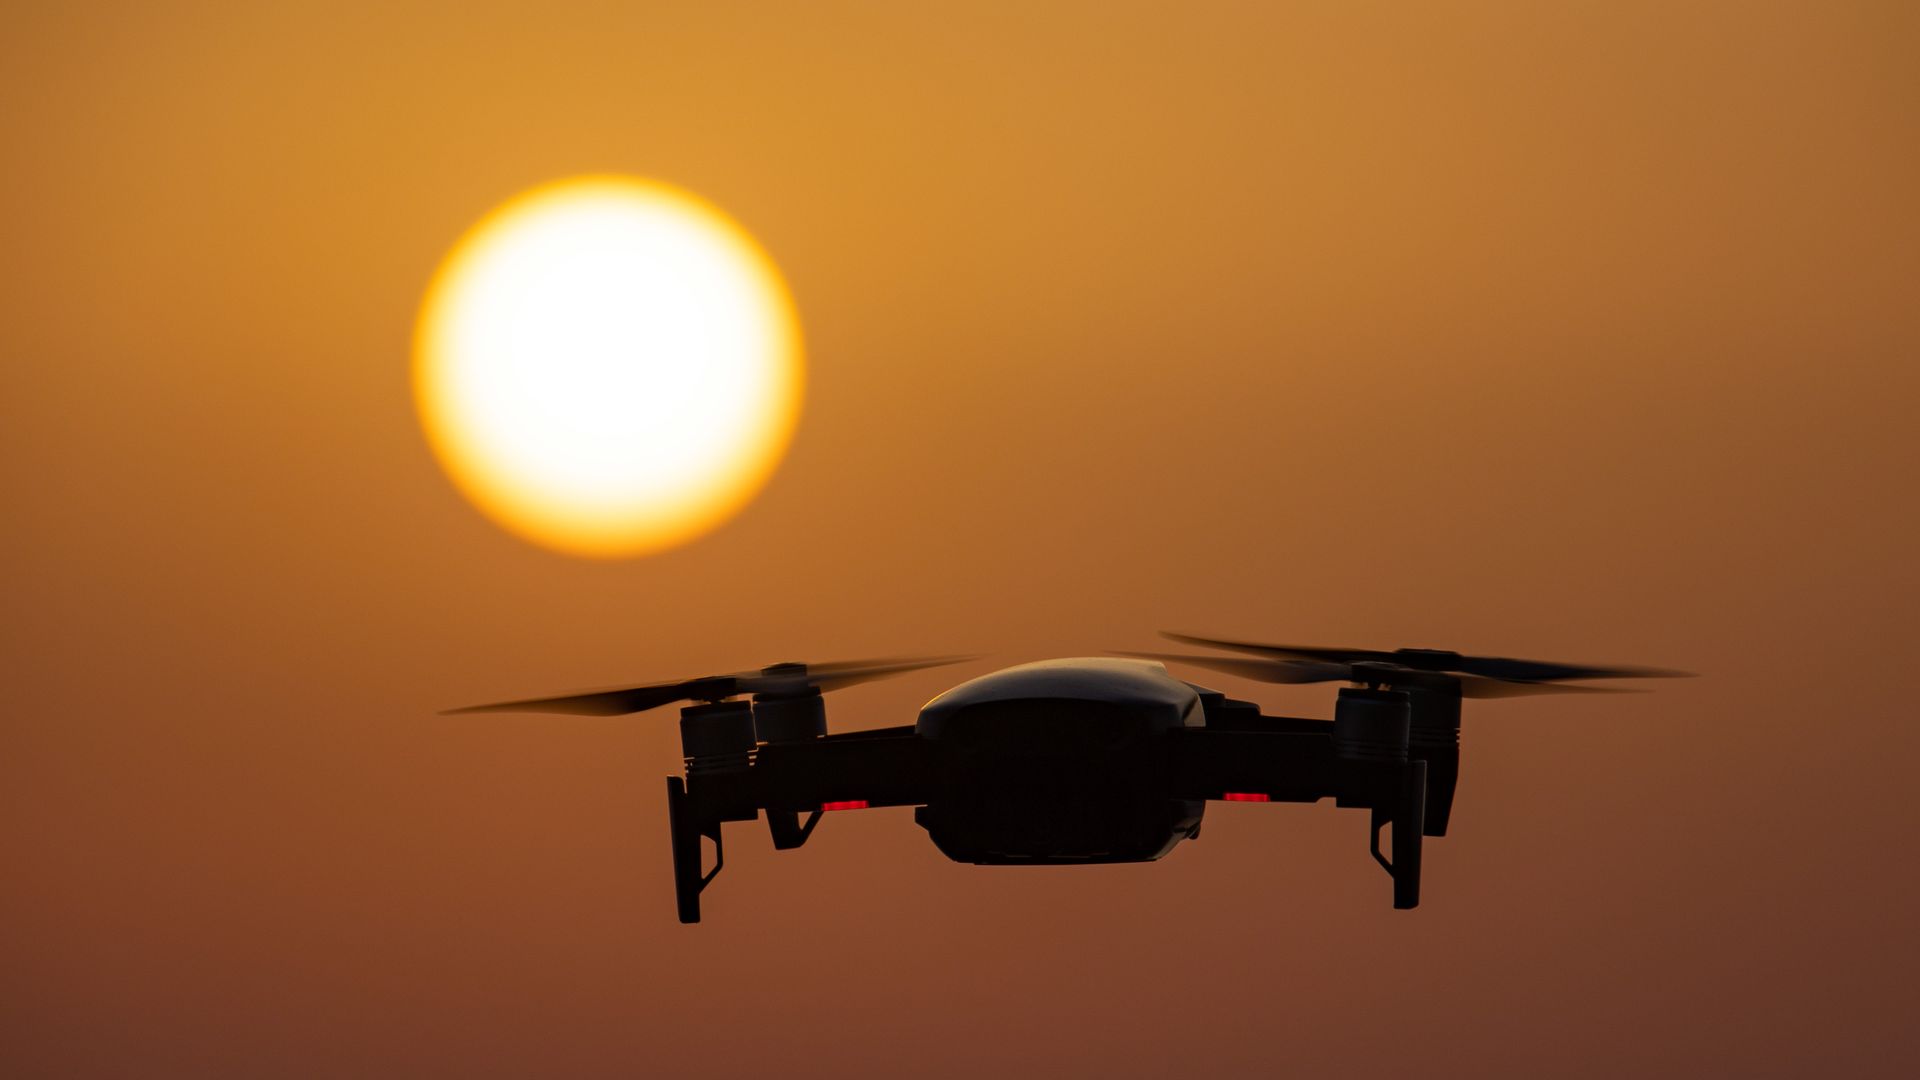 A DJI drone is seen hovering against a setting sun.